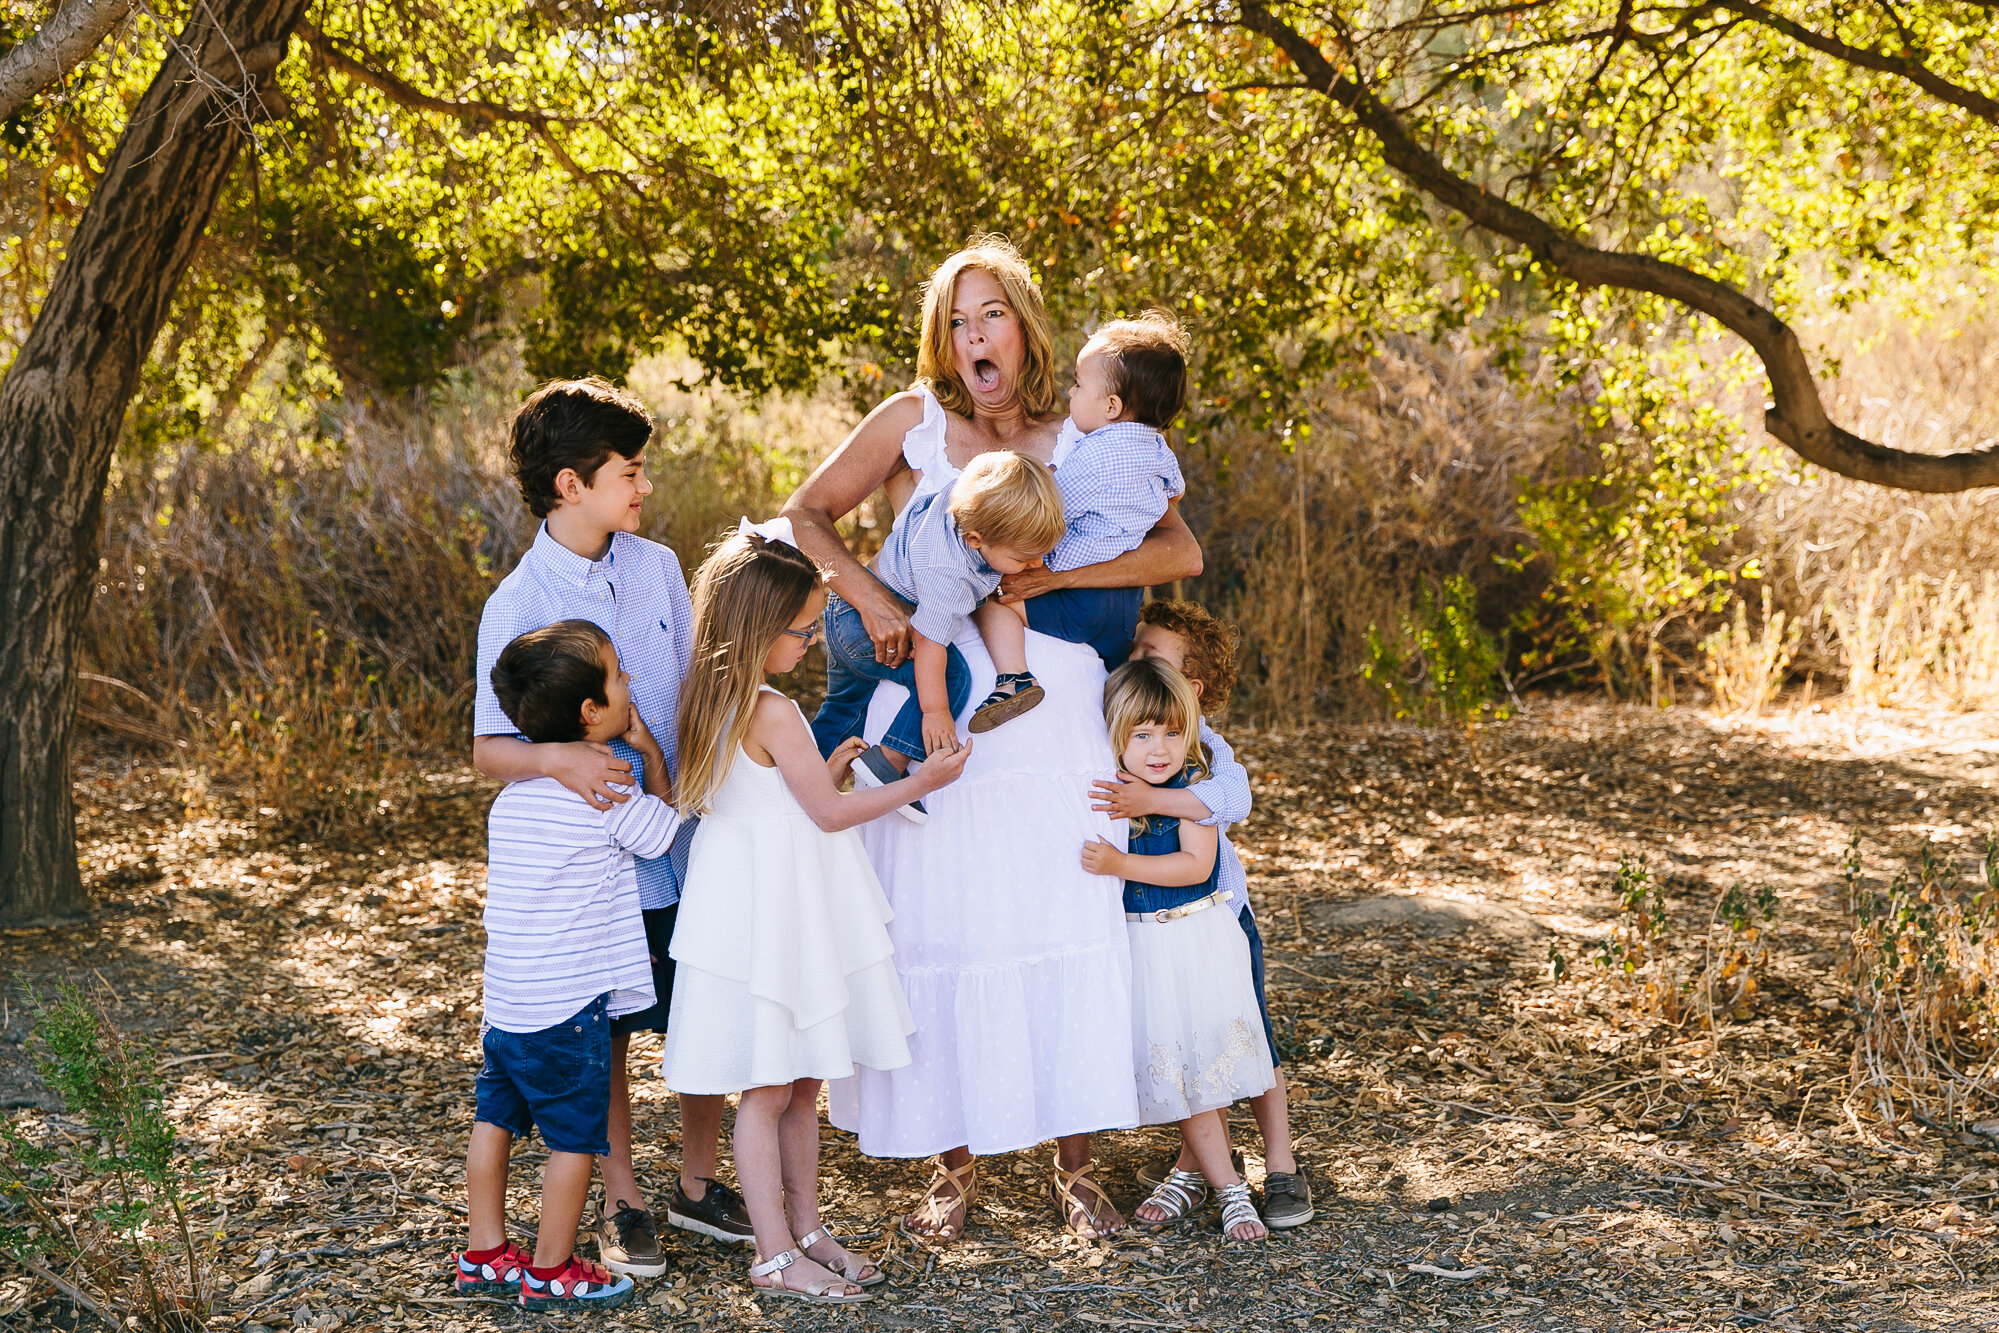 Los_Angeles_Family_Photography_Orange_County_Children_Babies_Field_Farm_Outdoors_Morning_Session_California_Girls_Boys_Kids_Photography-0633.jpg